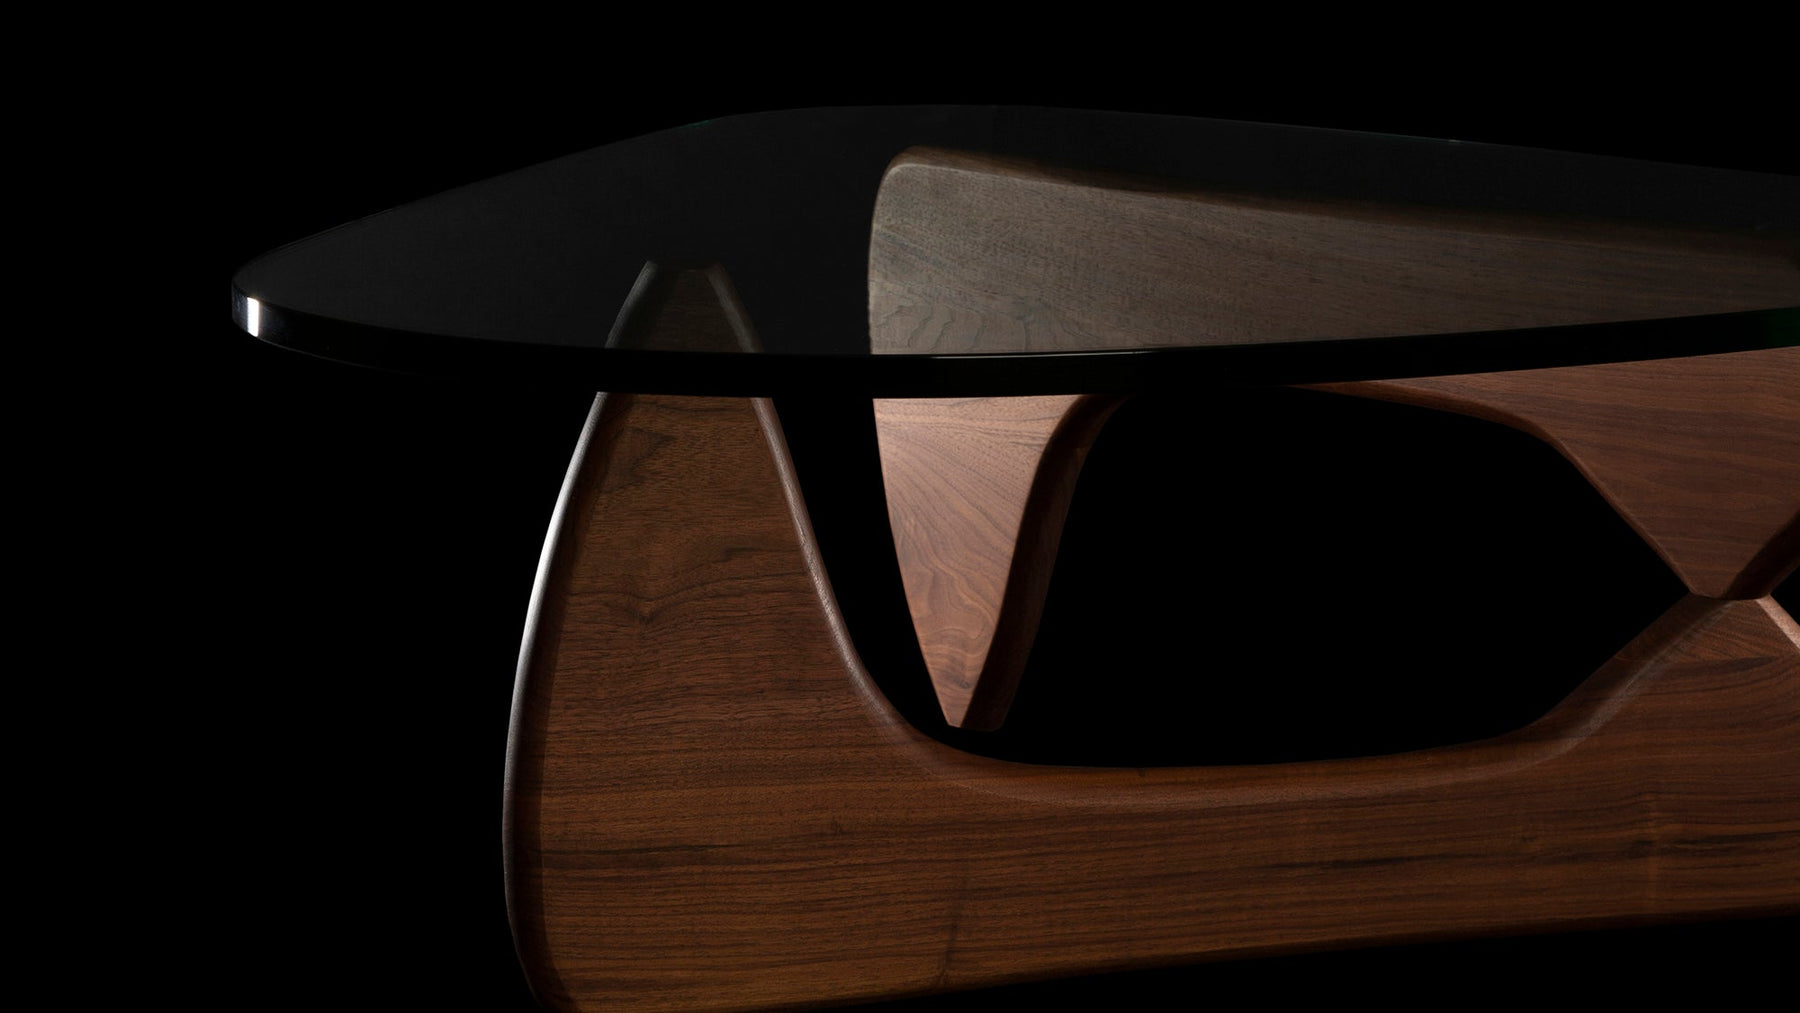 There is something about the dark grain of the Walnut legs of this amazing sultry Isamu Noguchi Coffee table seen with selective light on black surround